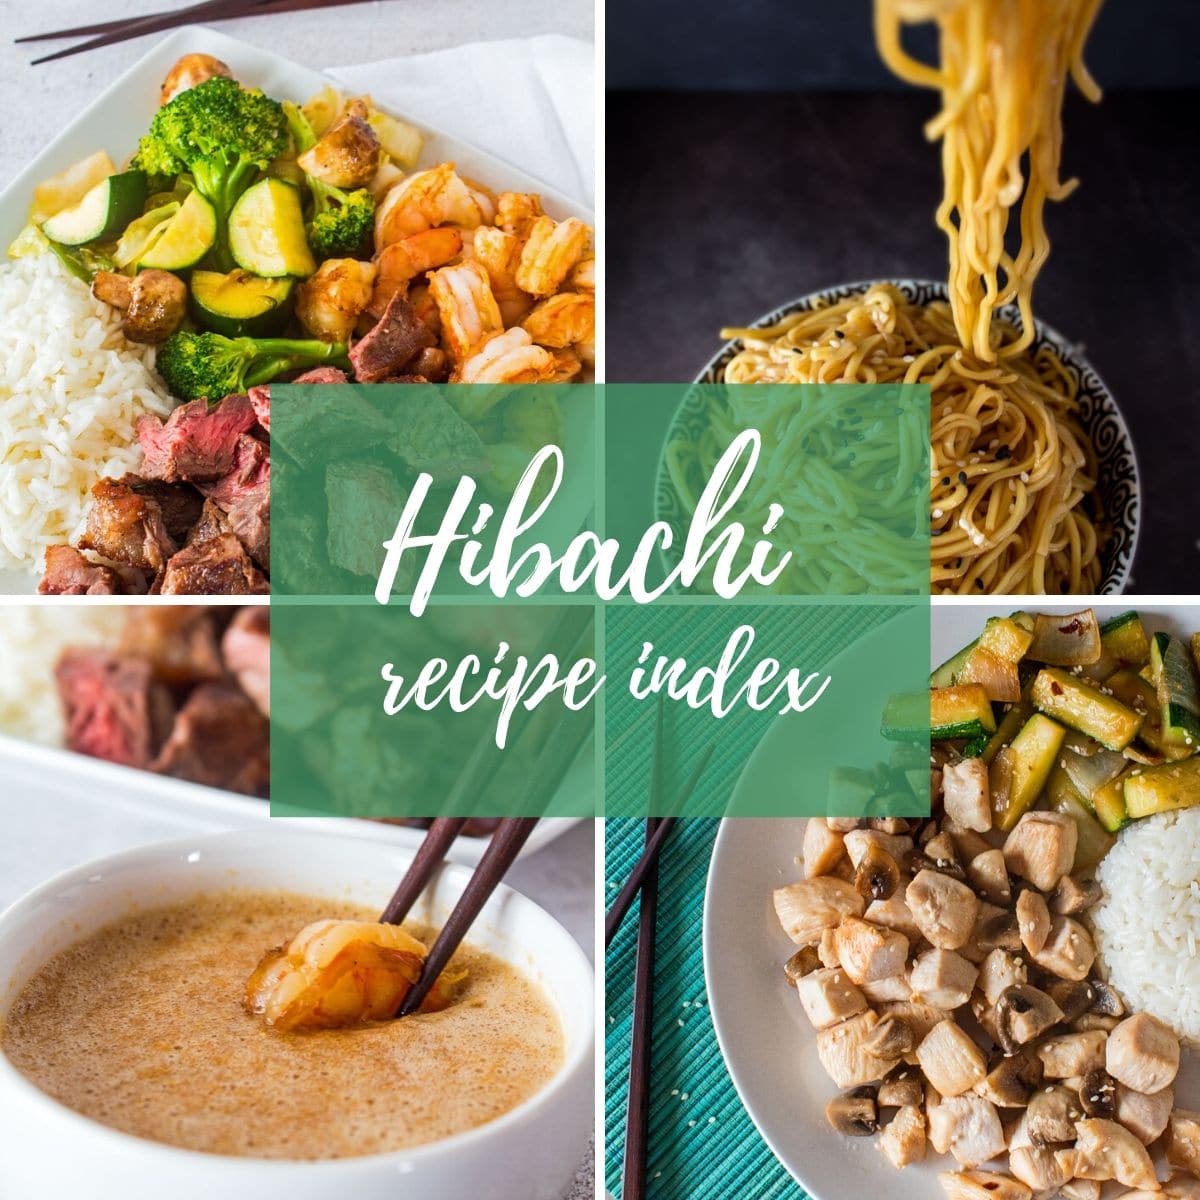 A square collage image showing four of my hibachi recipes - steak and shrimp, noodles, dipping sauce and chicken entree with a green overlay for text 'Hibachi recipe index'.